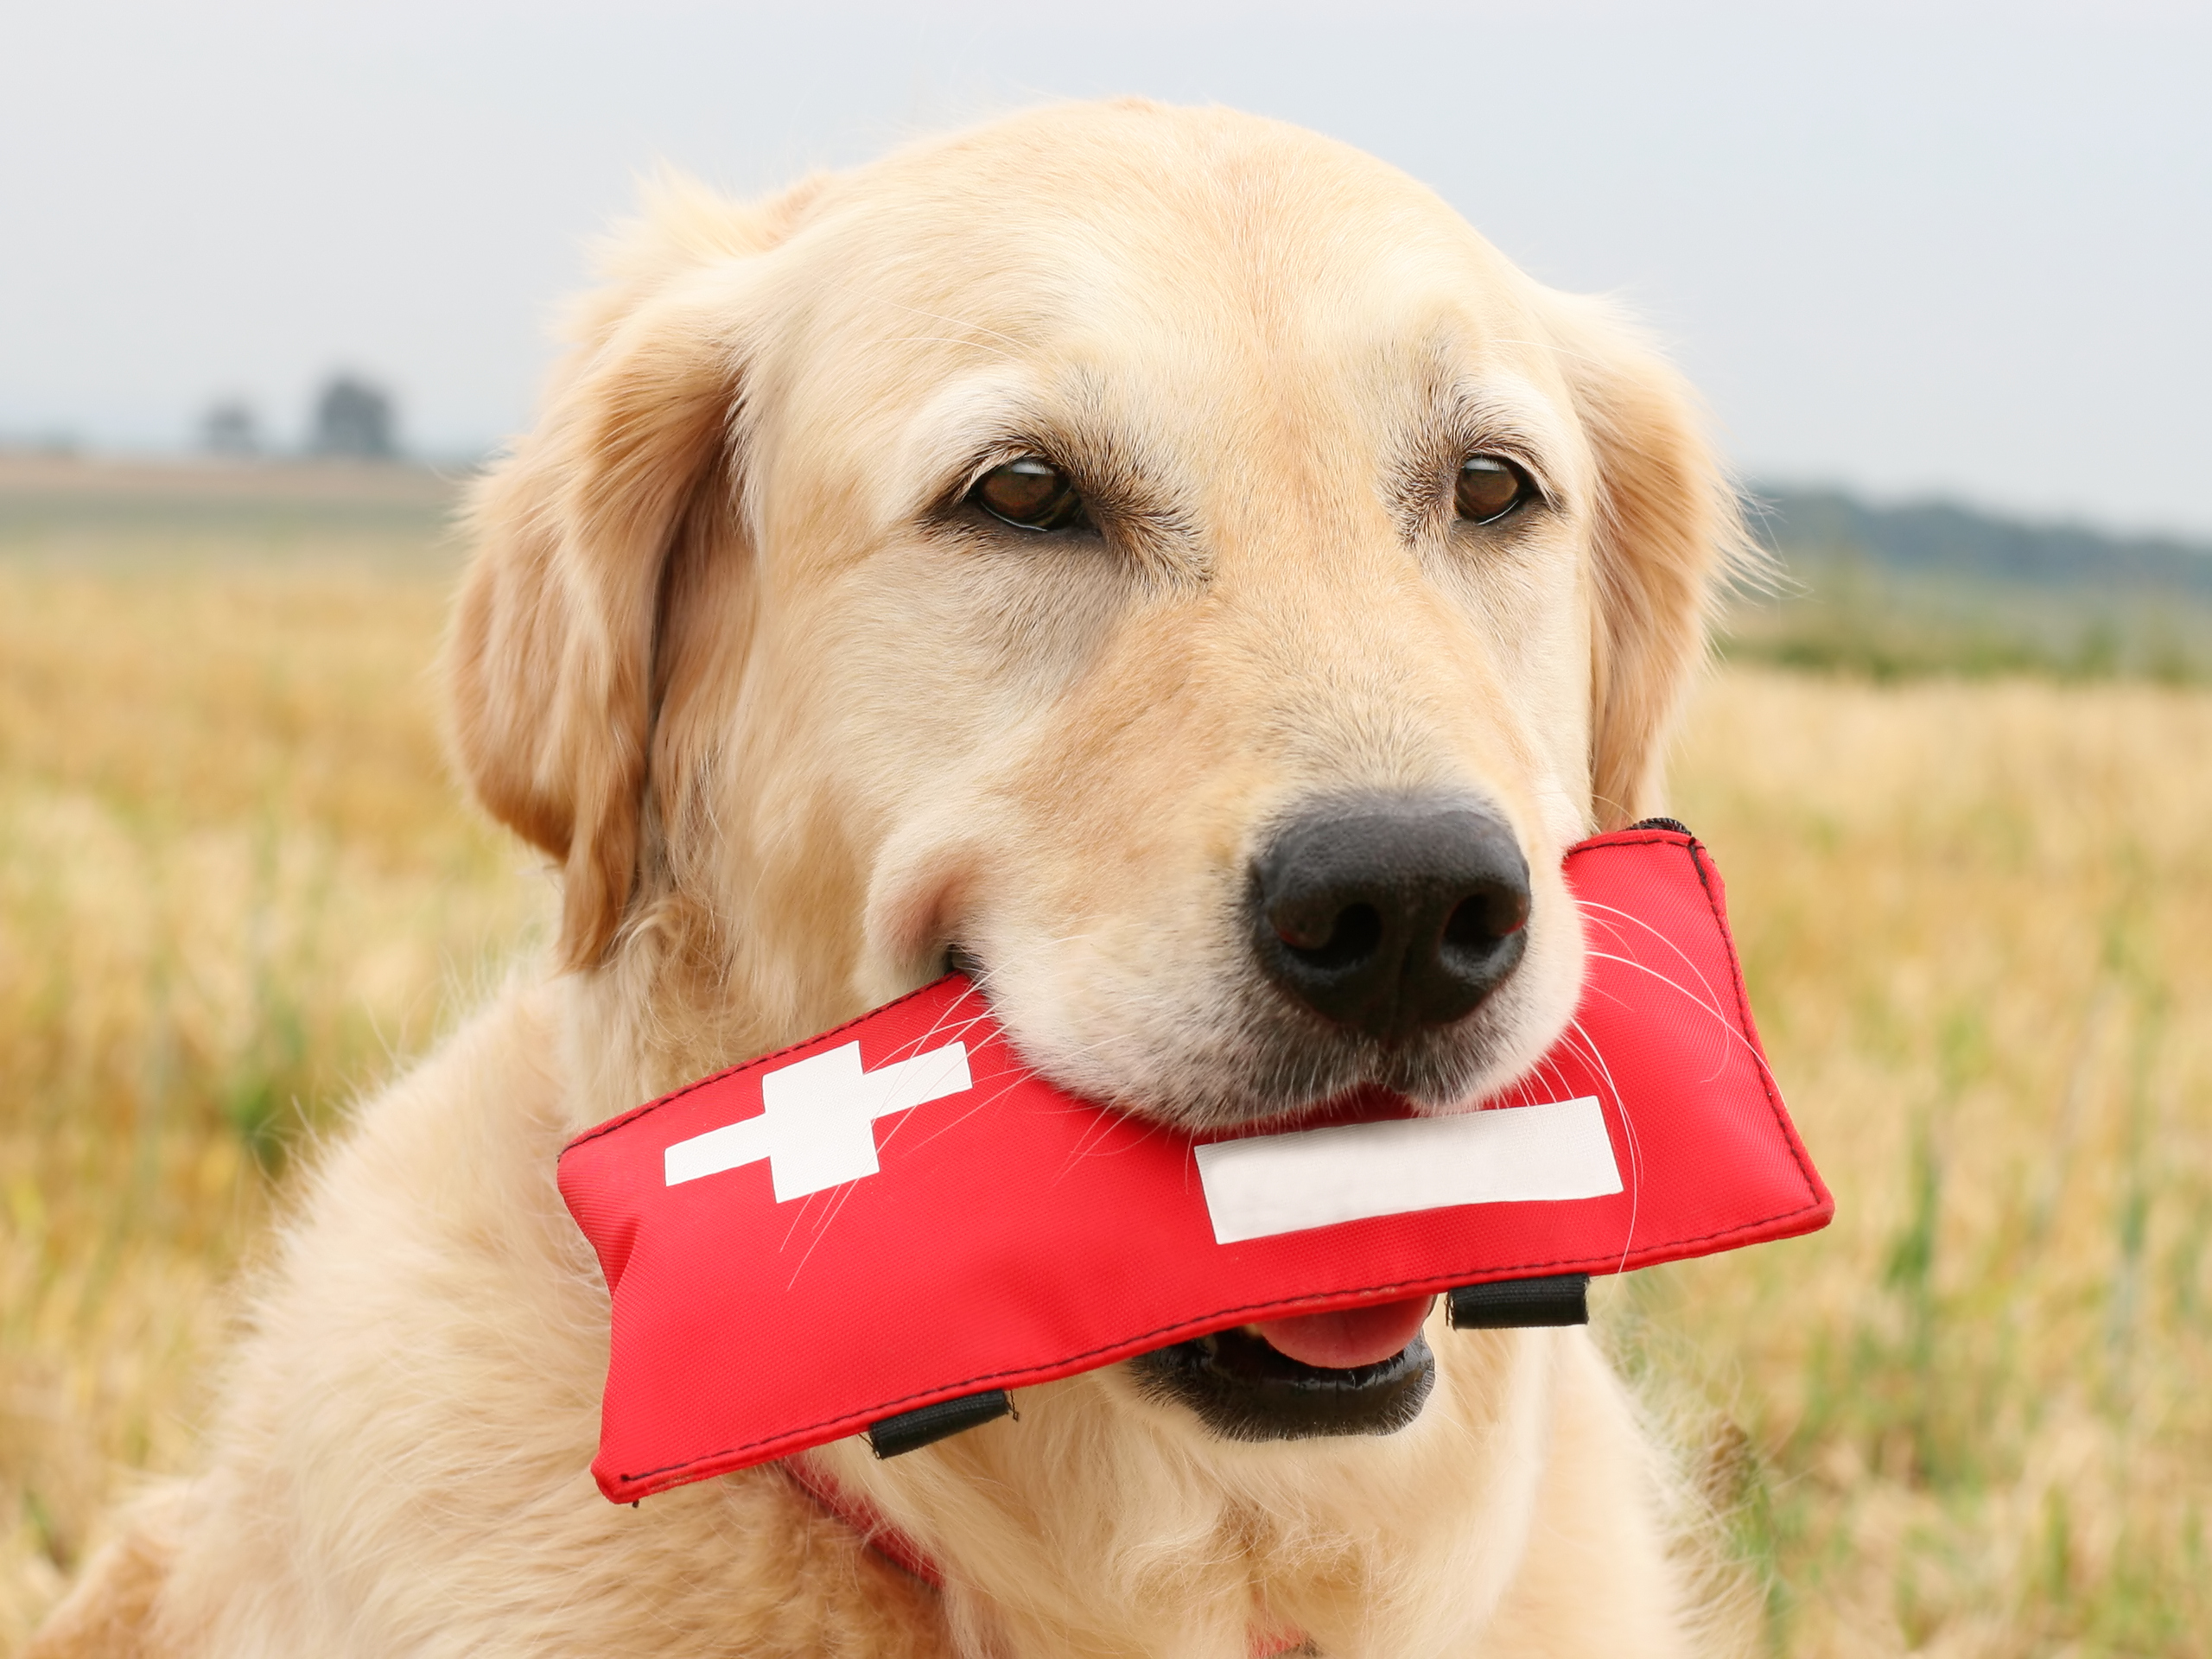 Dog carrying a first aid kit in it's mouth